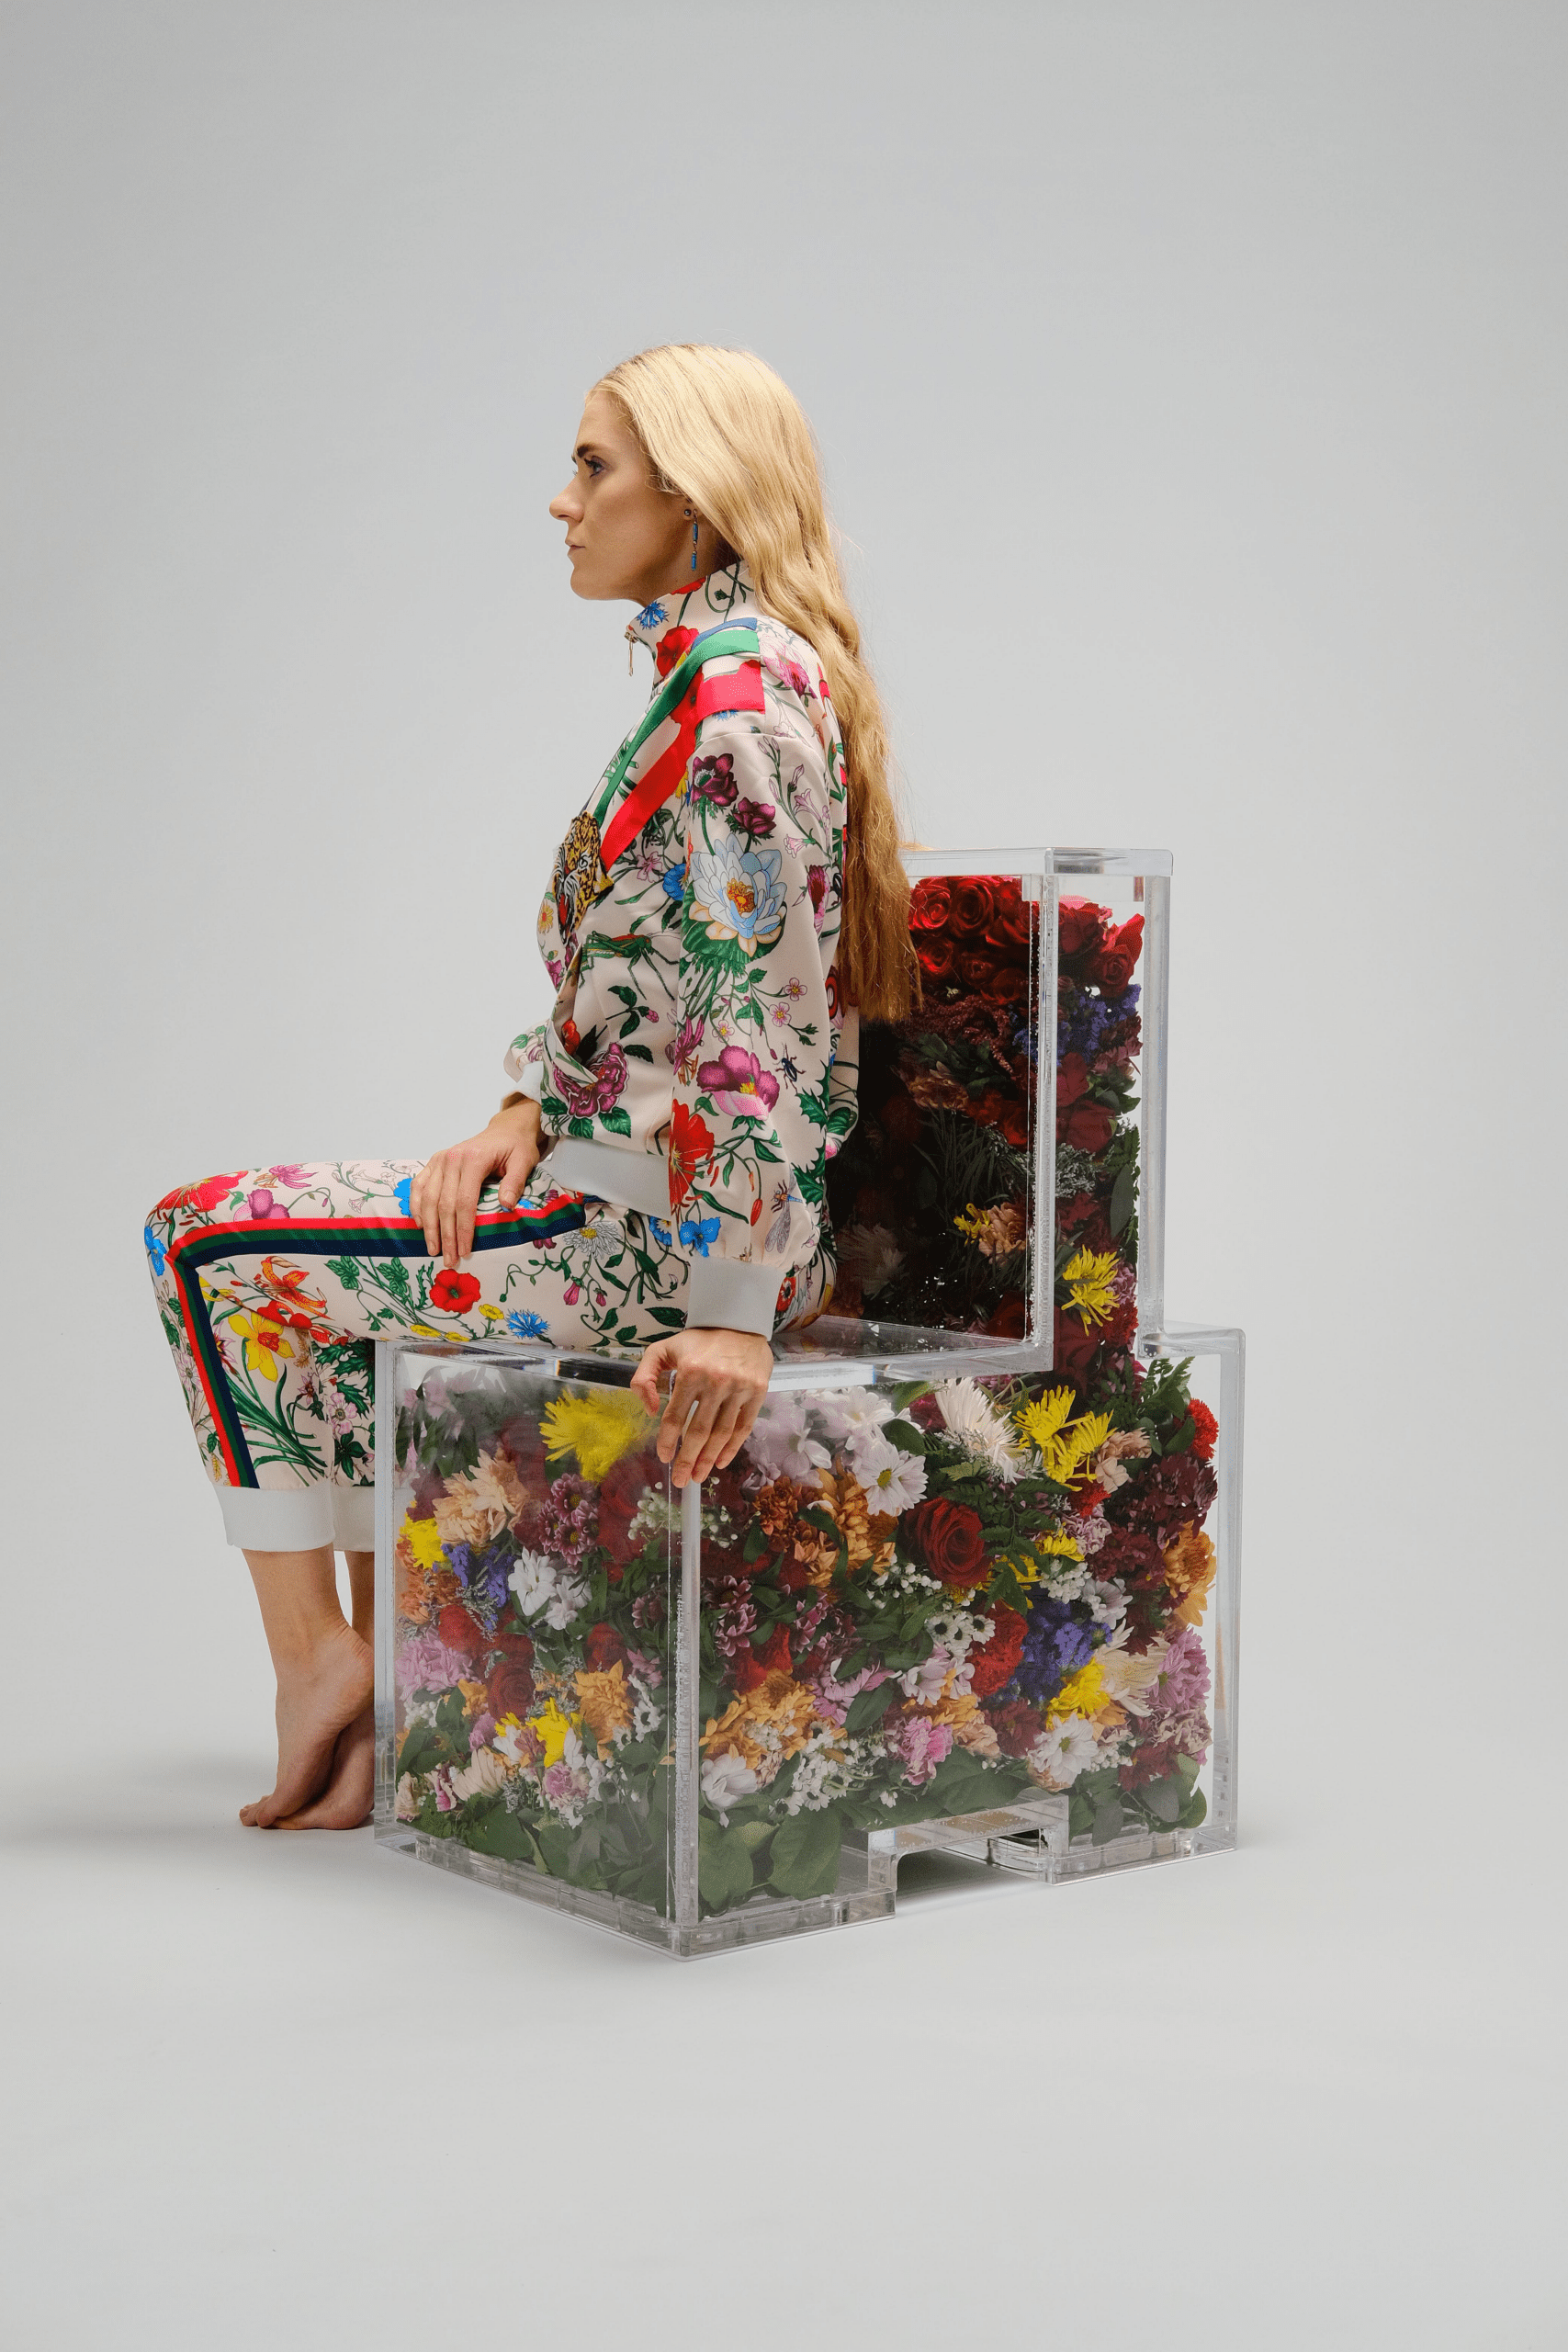 woman in a floral outfit sitting in a transparent chair filled with flowers